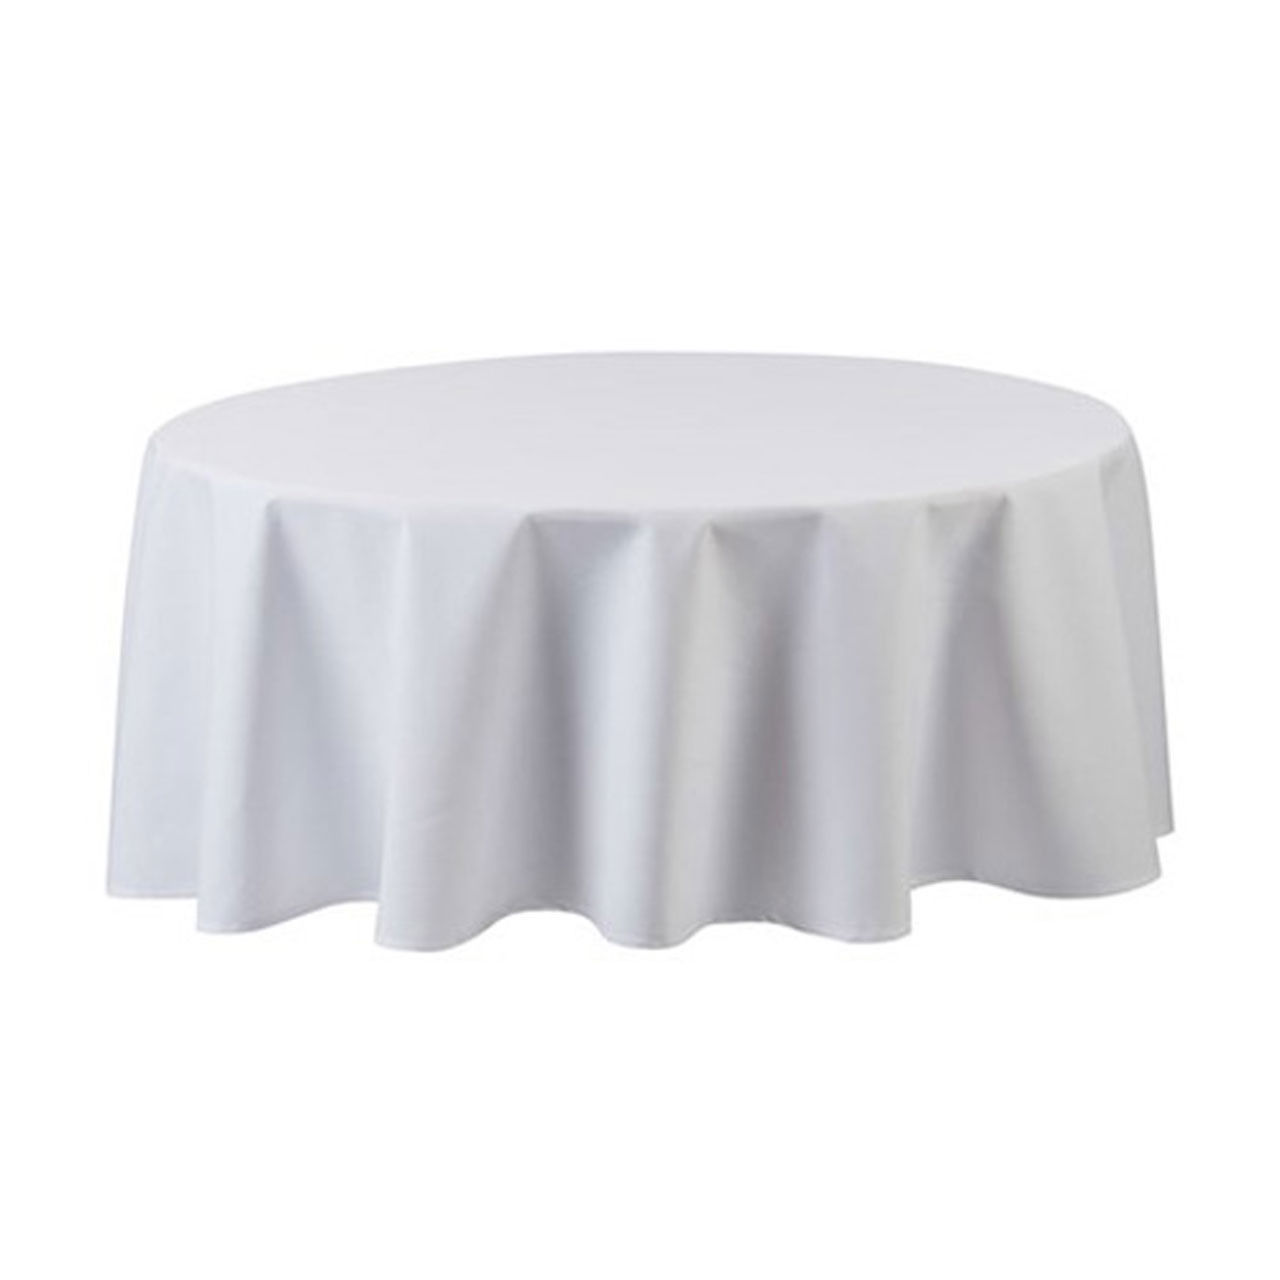 What is the quantity of 120 round tablecloths per case?